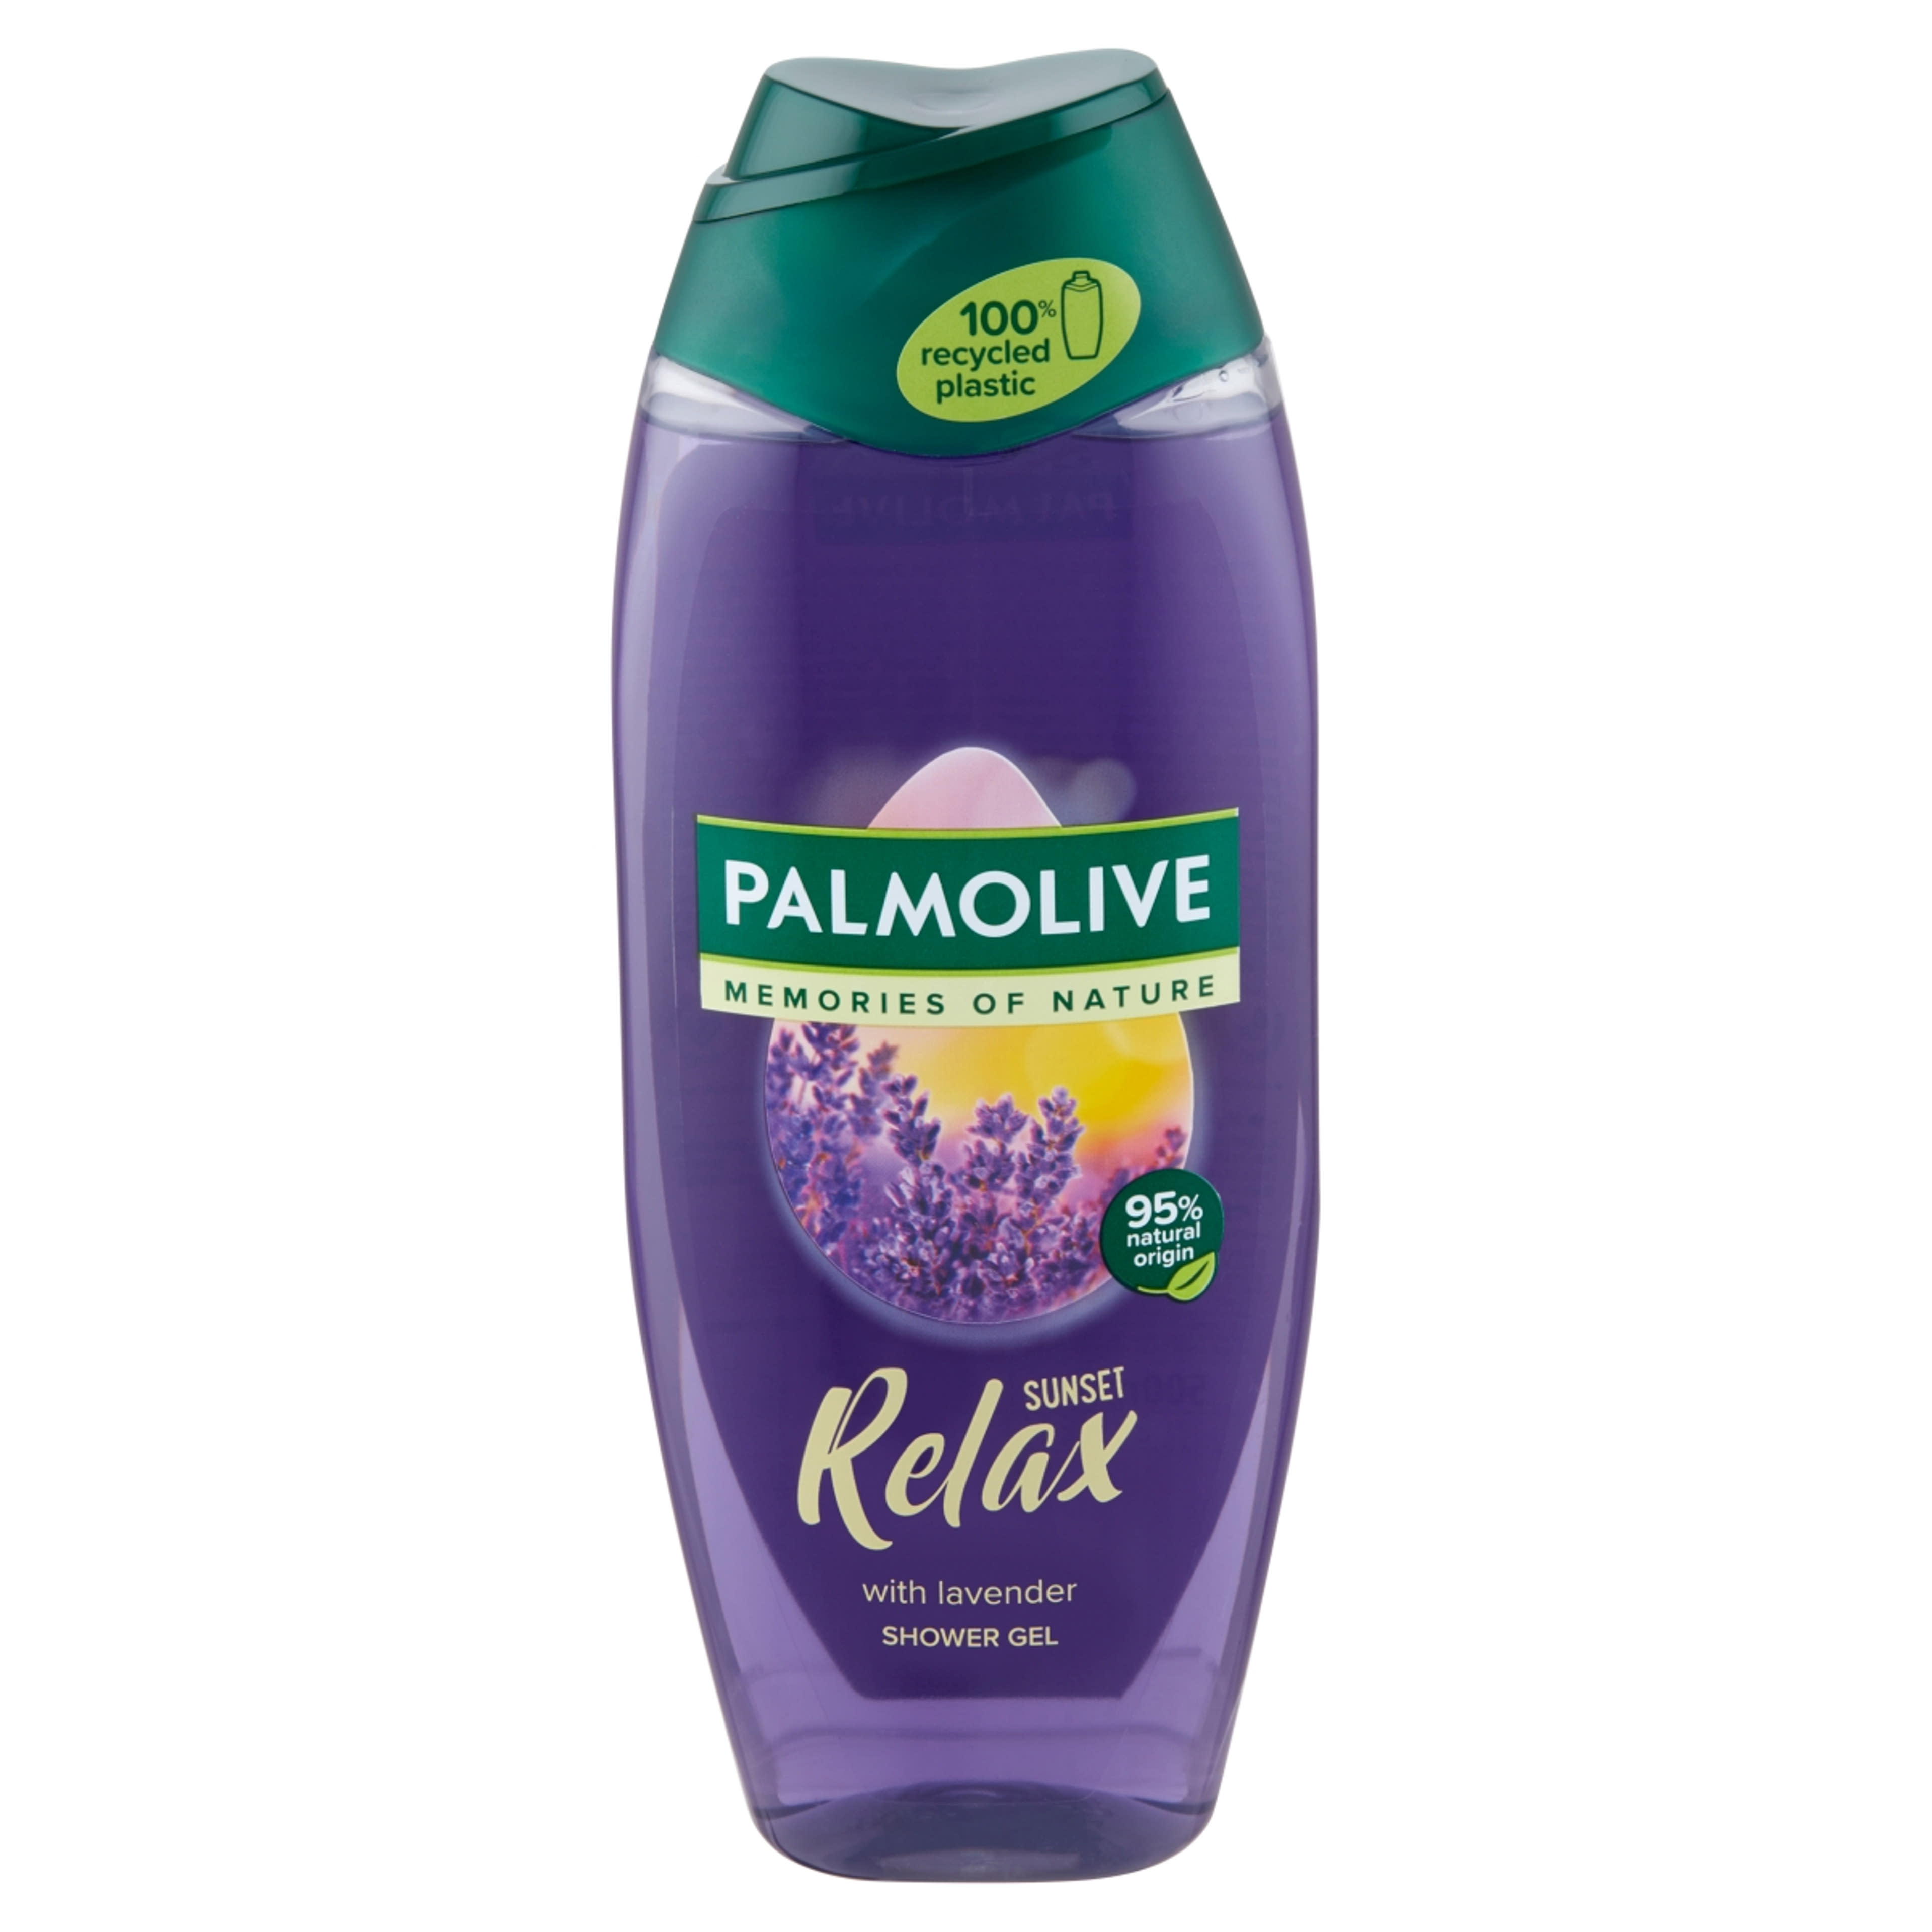 Palmolive Memories of Nature Sunset Relax tusfürdő - 500 ml-2